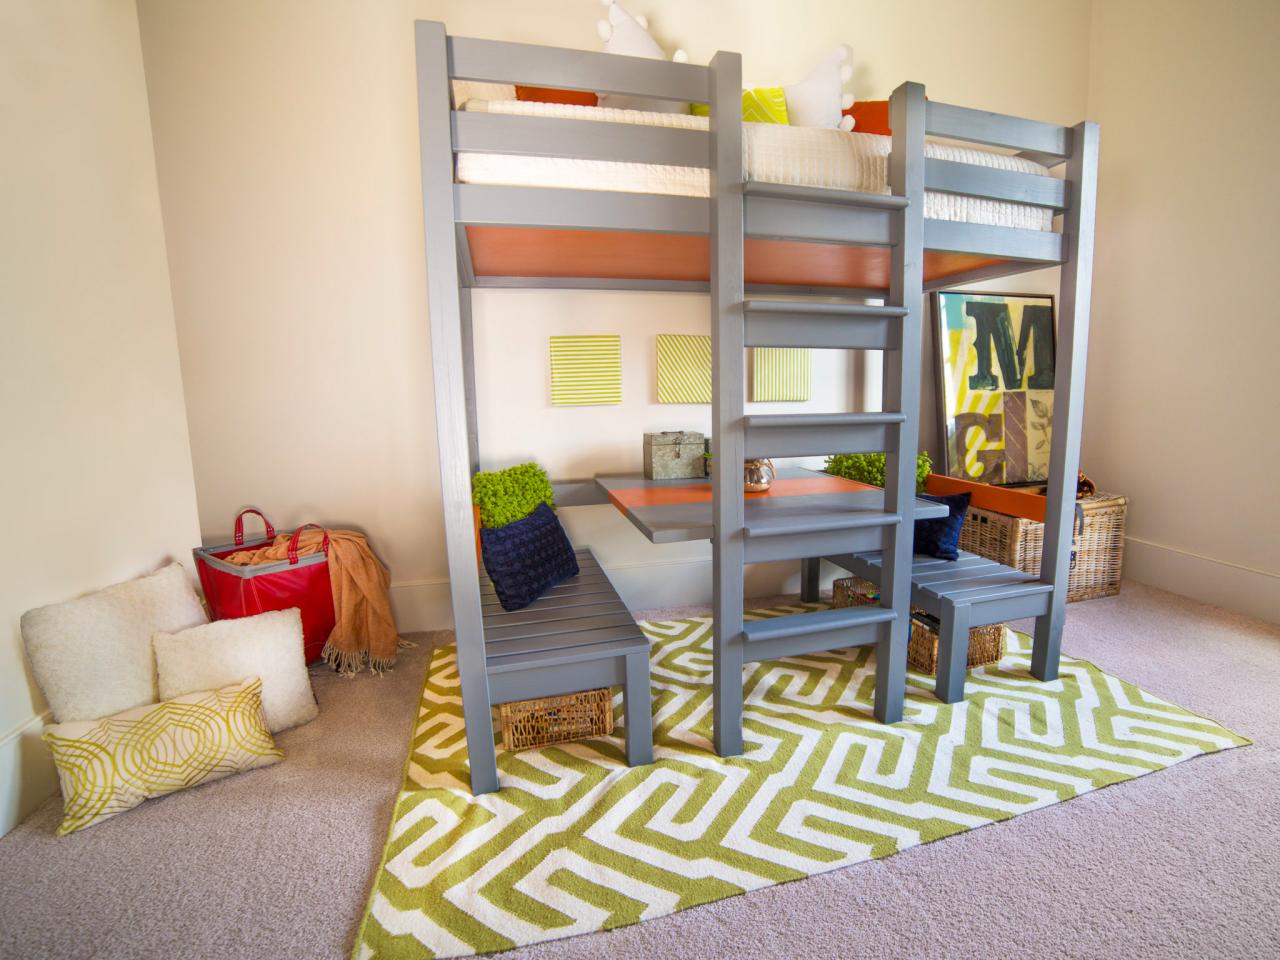 How To Build A Loft Bed With Built In, How To Make A Loft Bed Look Nice